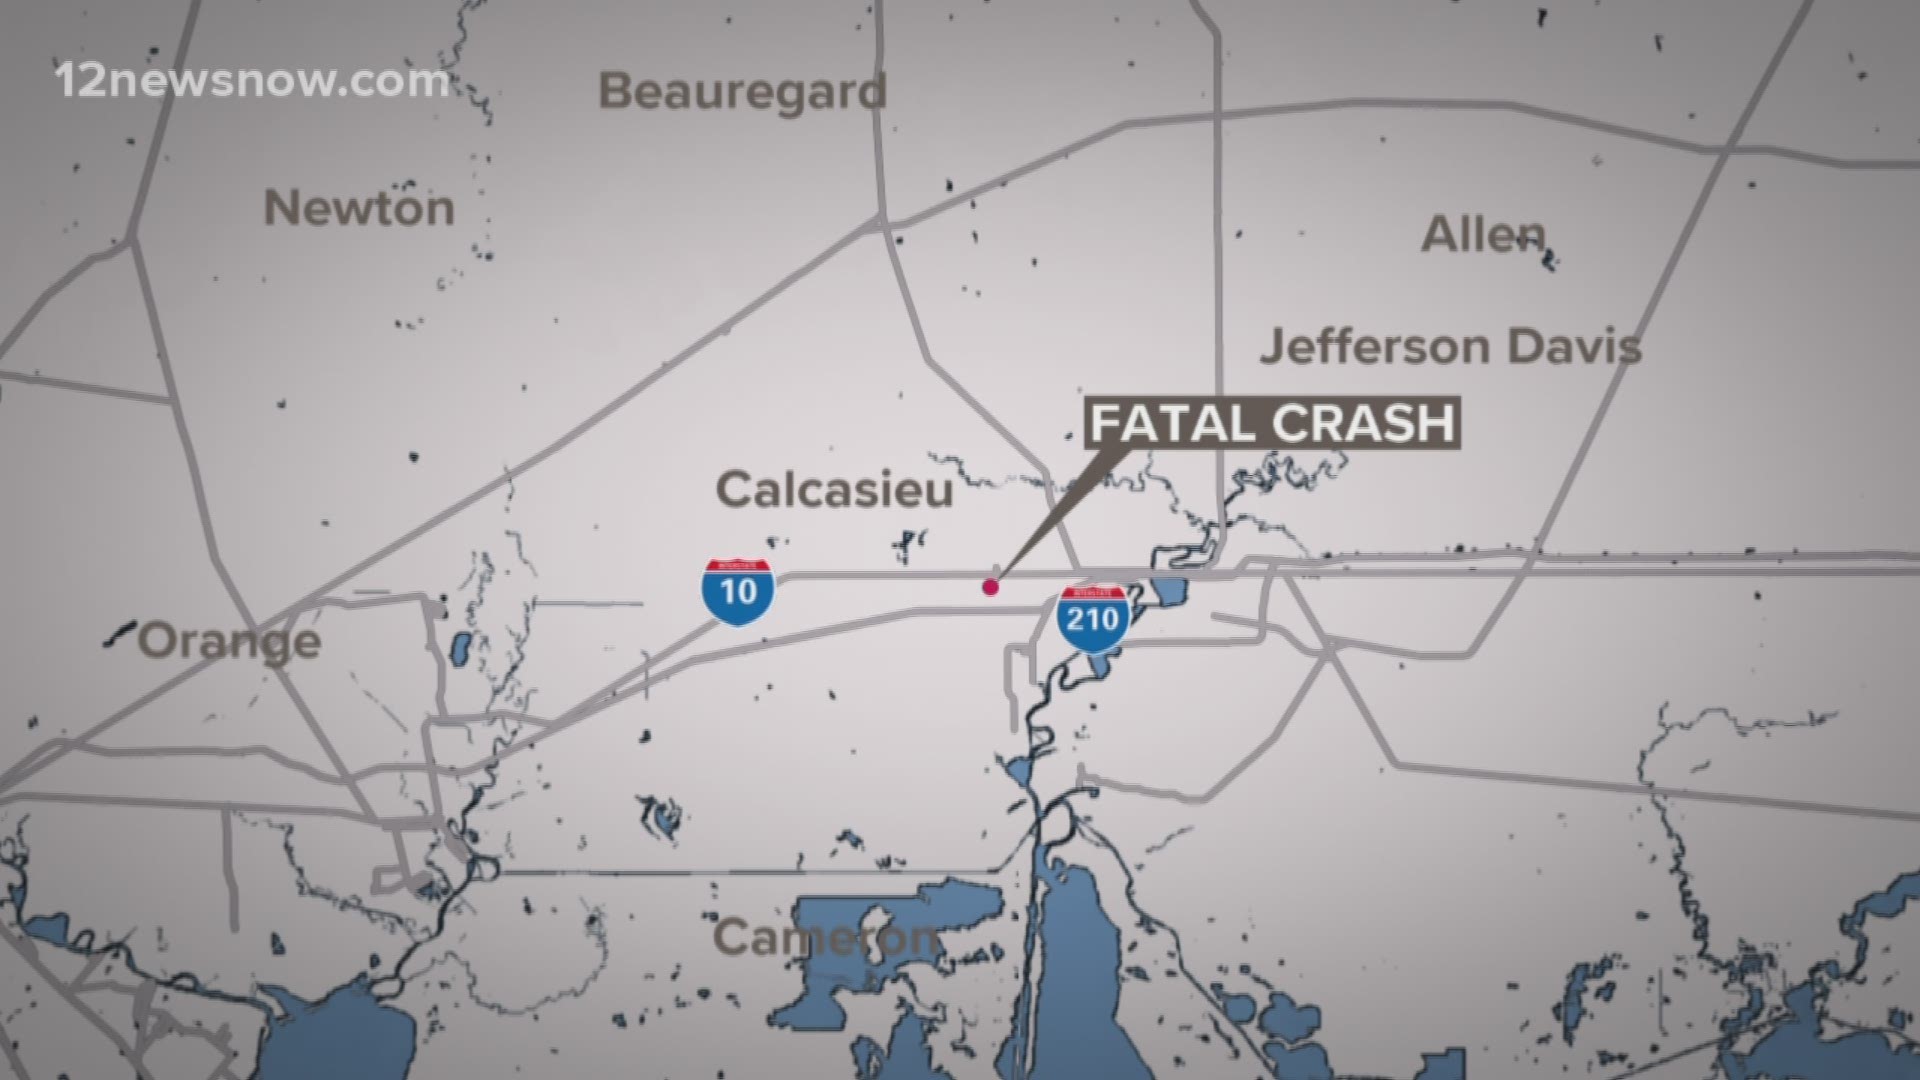 A 76-year-old man traveling the wrong way on I-10 caused one fatality near Vinton, LA on Jan. 15.